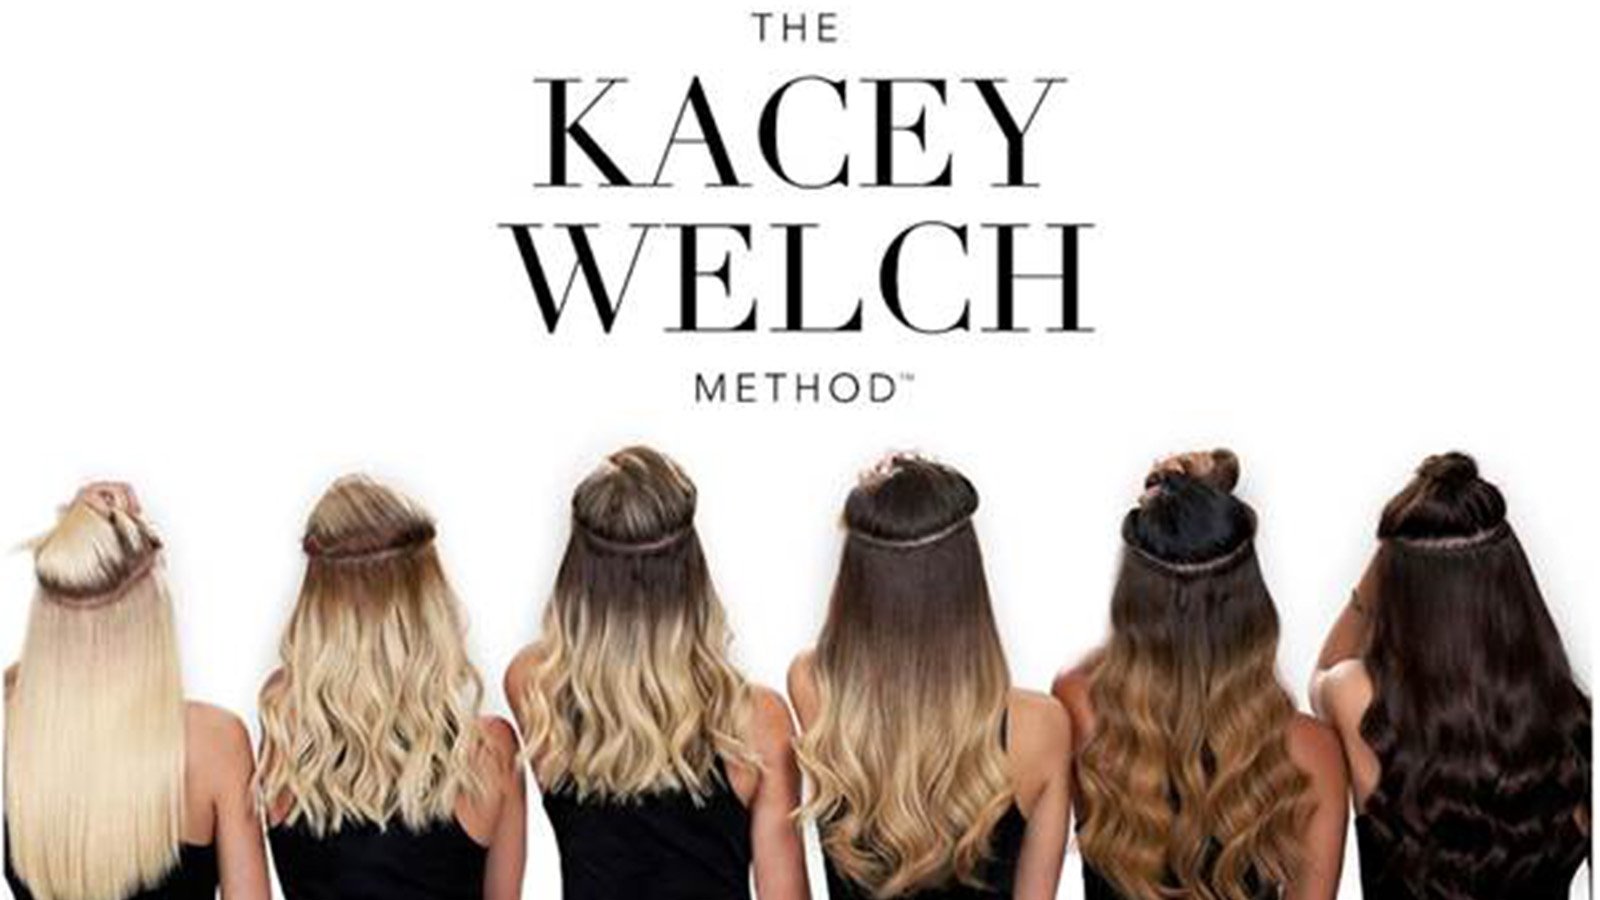 The Kacey Welch Method